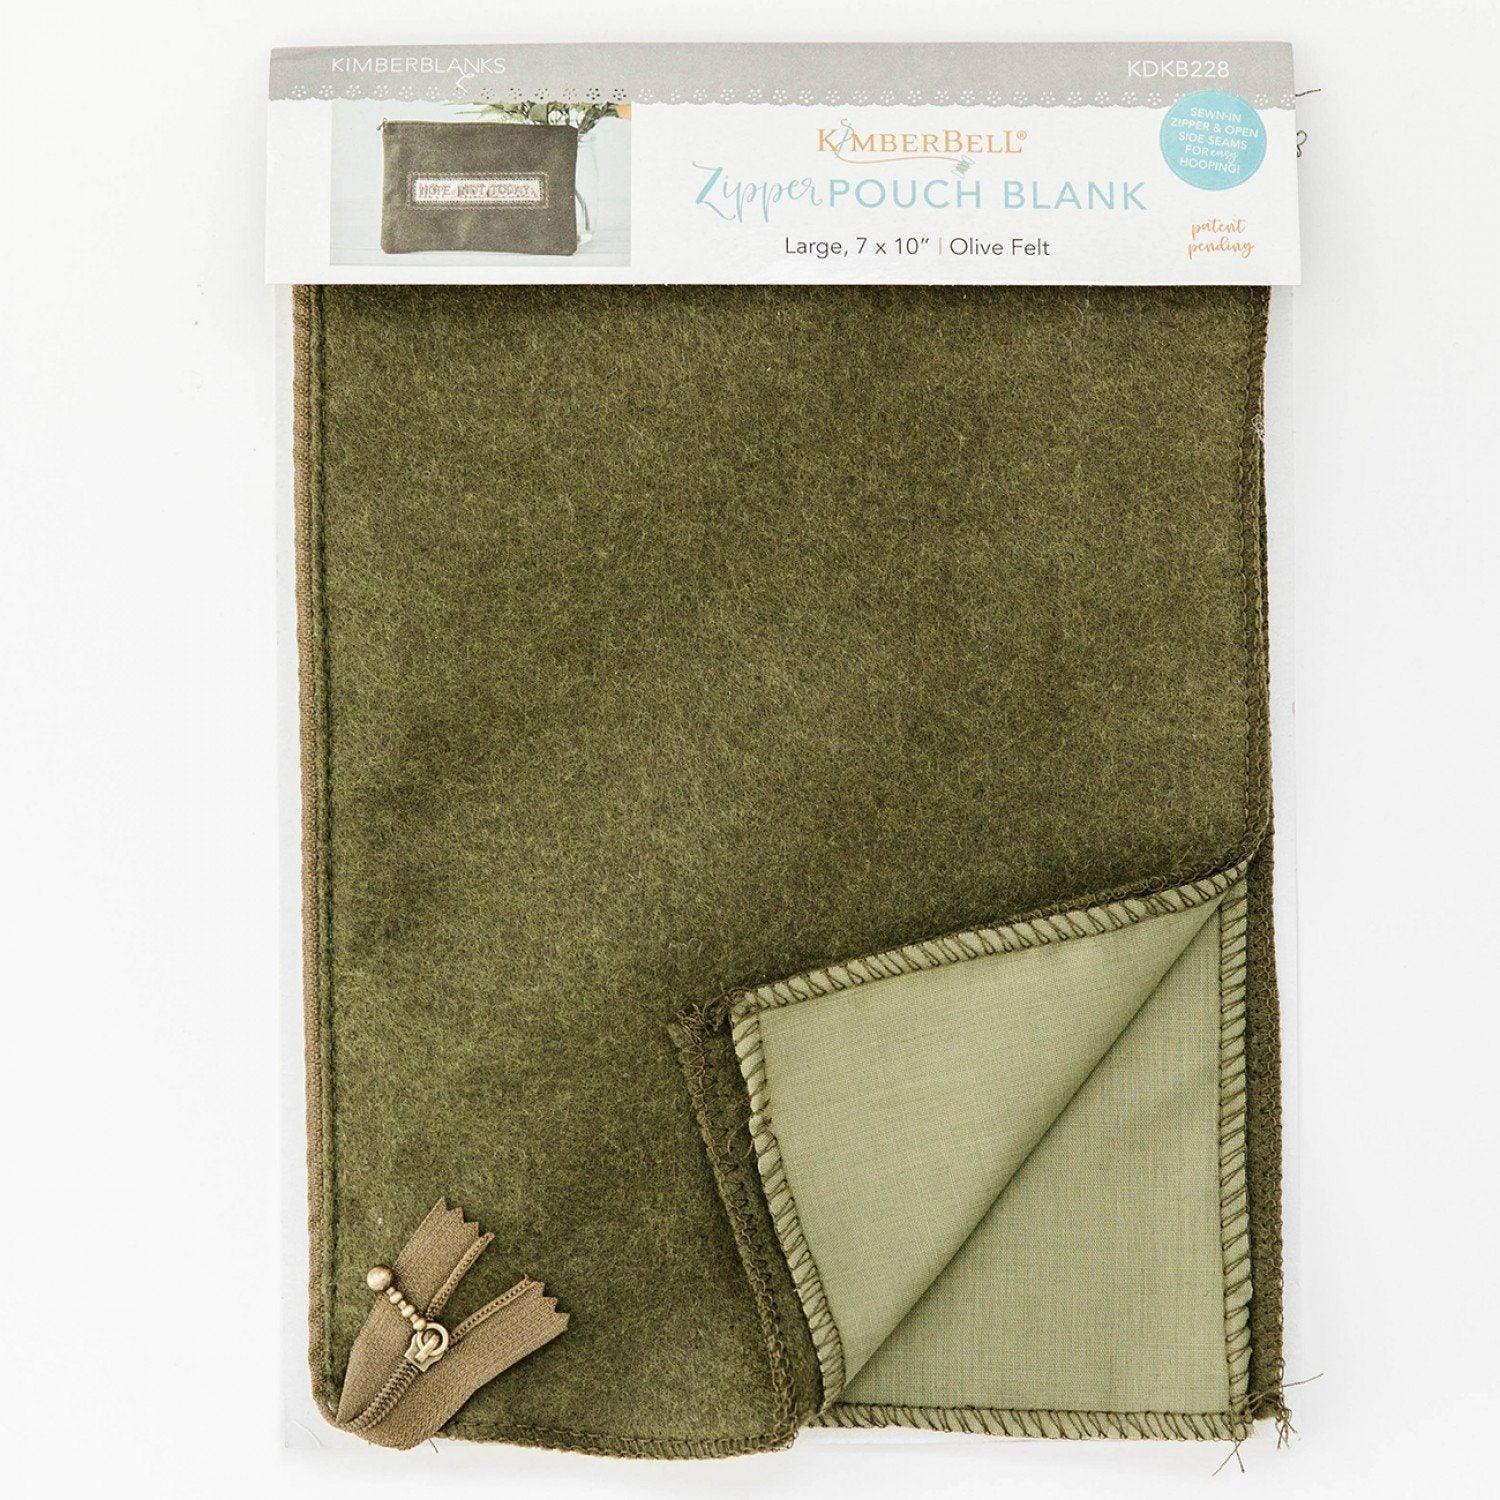 Zipper Pouch Blank - Olive - Felt - Large (7" x 10") - Kimberbell - Kawartha Quilting and Sewing LTD.